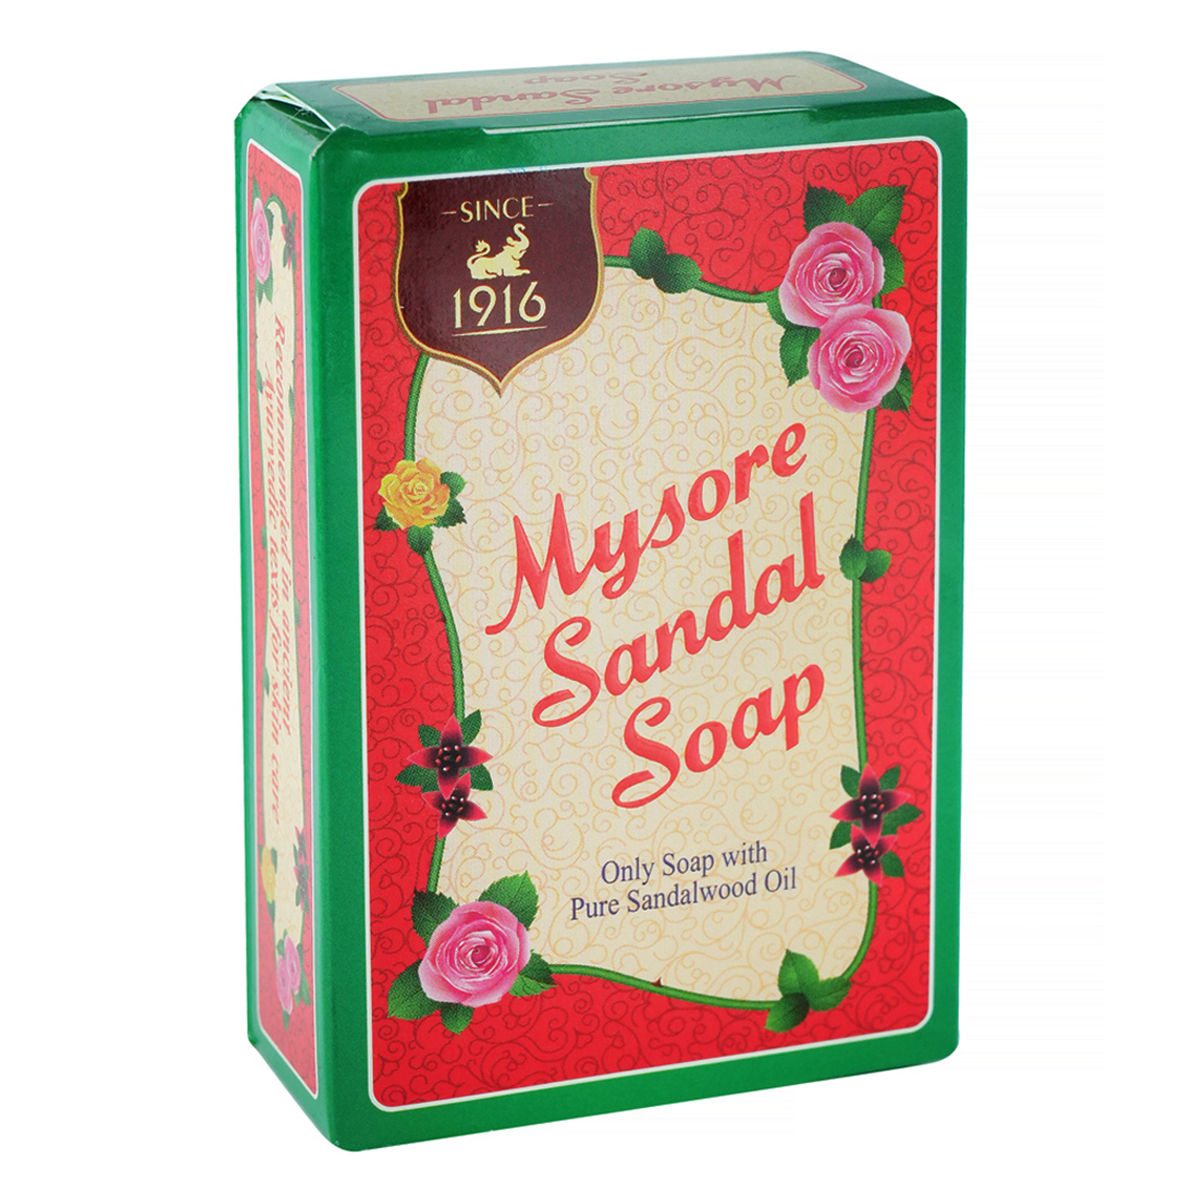 KSDL of Mysore Sandal Soap fame to expand capacity in 100th yr - The  Economic Times